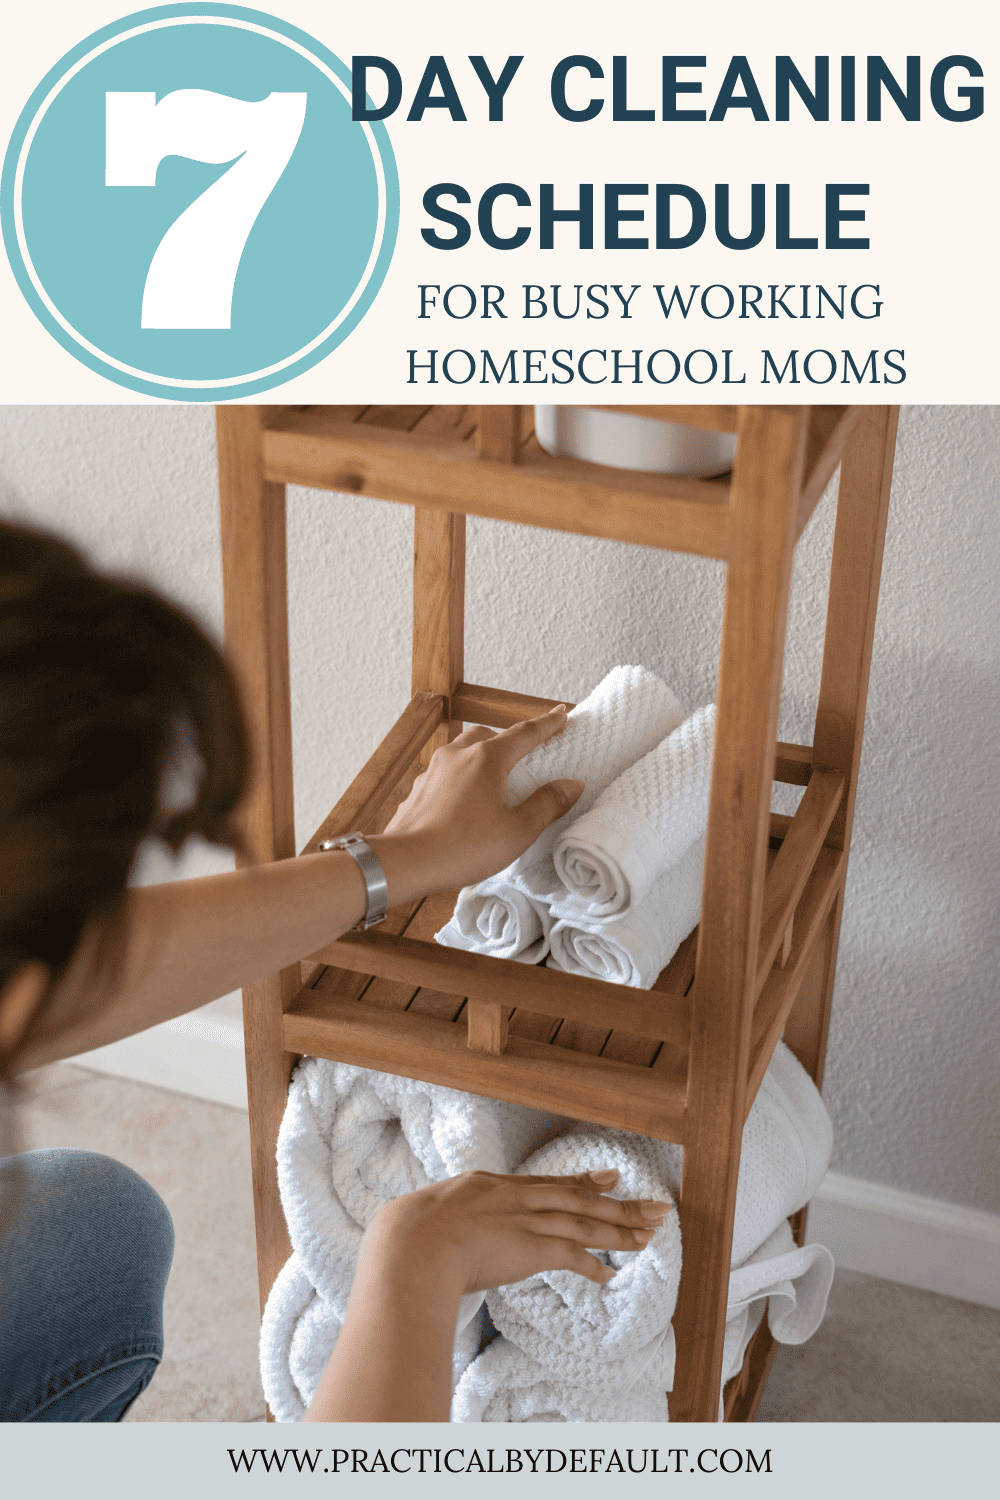 7 Day Cleaning Schedule For Busy Working Homeschool Moms